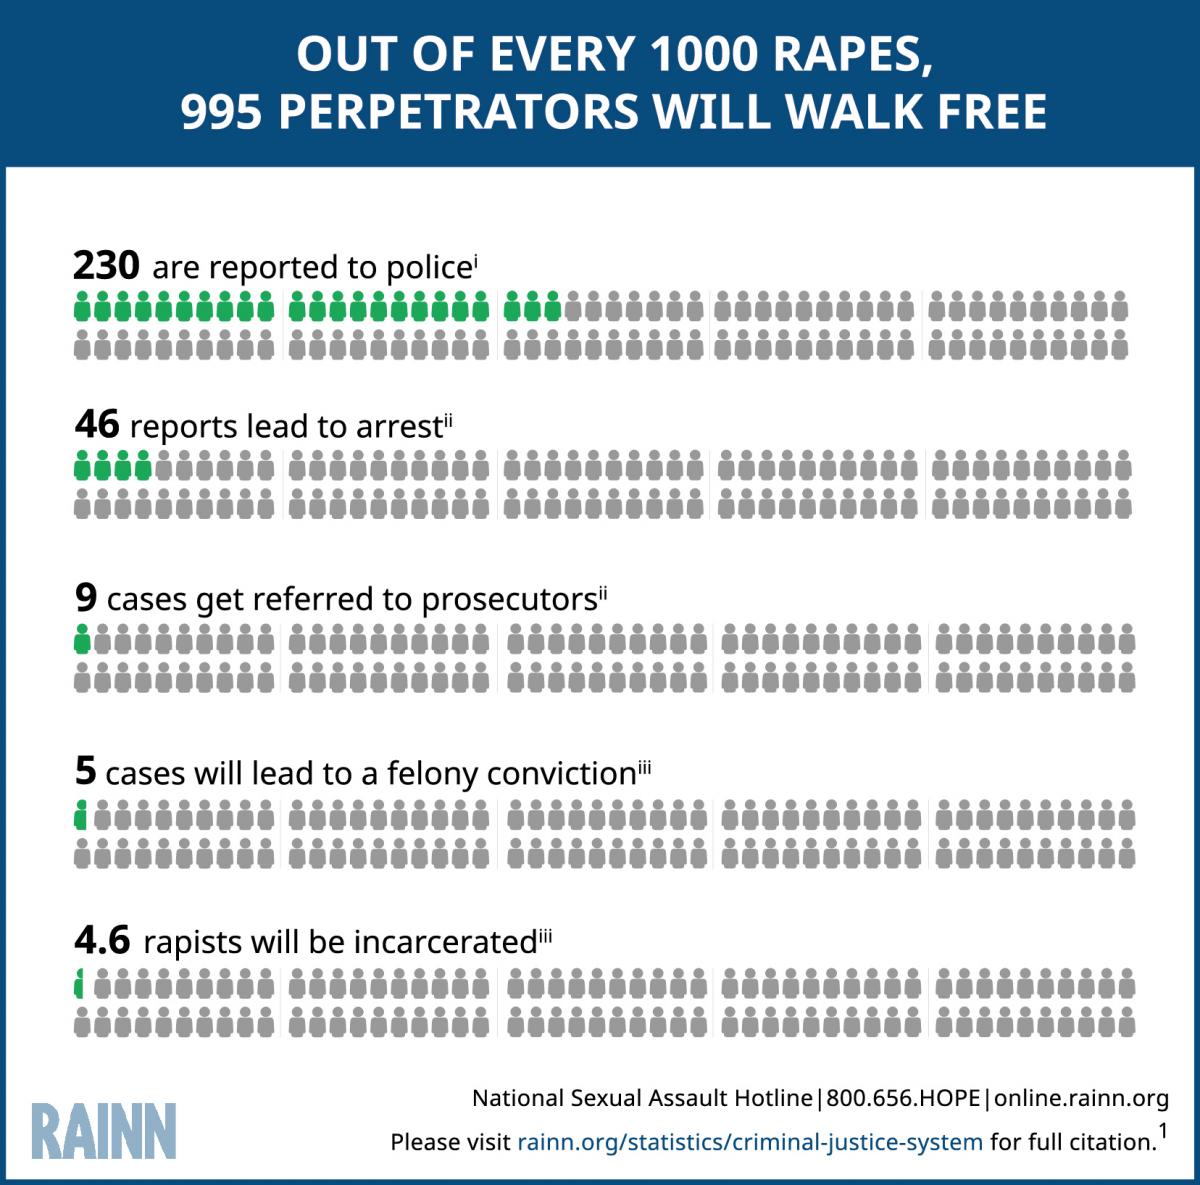 Graphic demonstrating that out of 1000 rapes, 994 perpetrators will walk free. Out of every 1,000 rapes, 310 are reported to the police, 57 reports lead to arrest, 13 cases get referred to prosecutors, 7 cases will lead to a felony conviction, 6 rapists will be incarcerated.